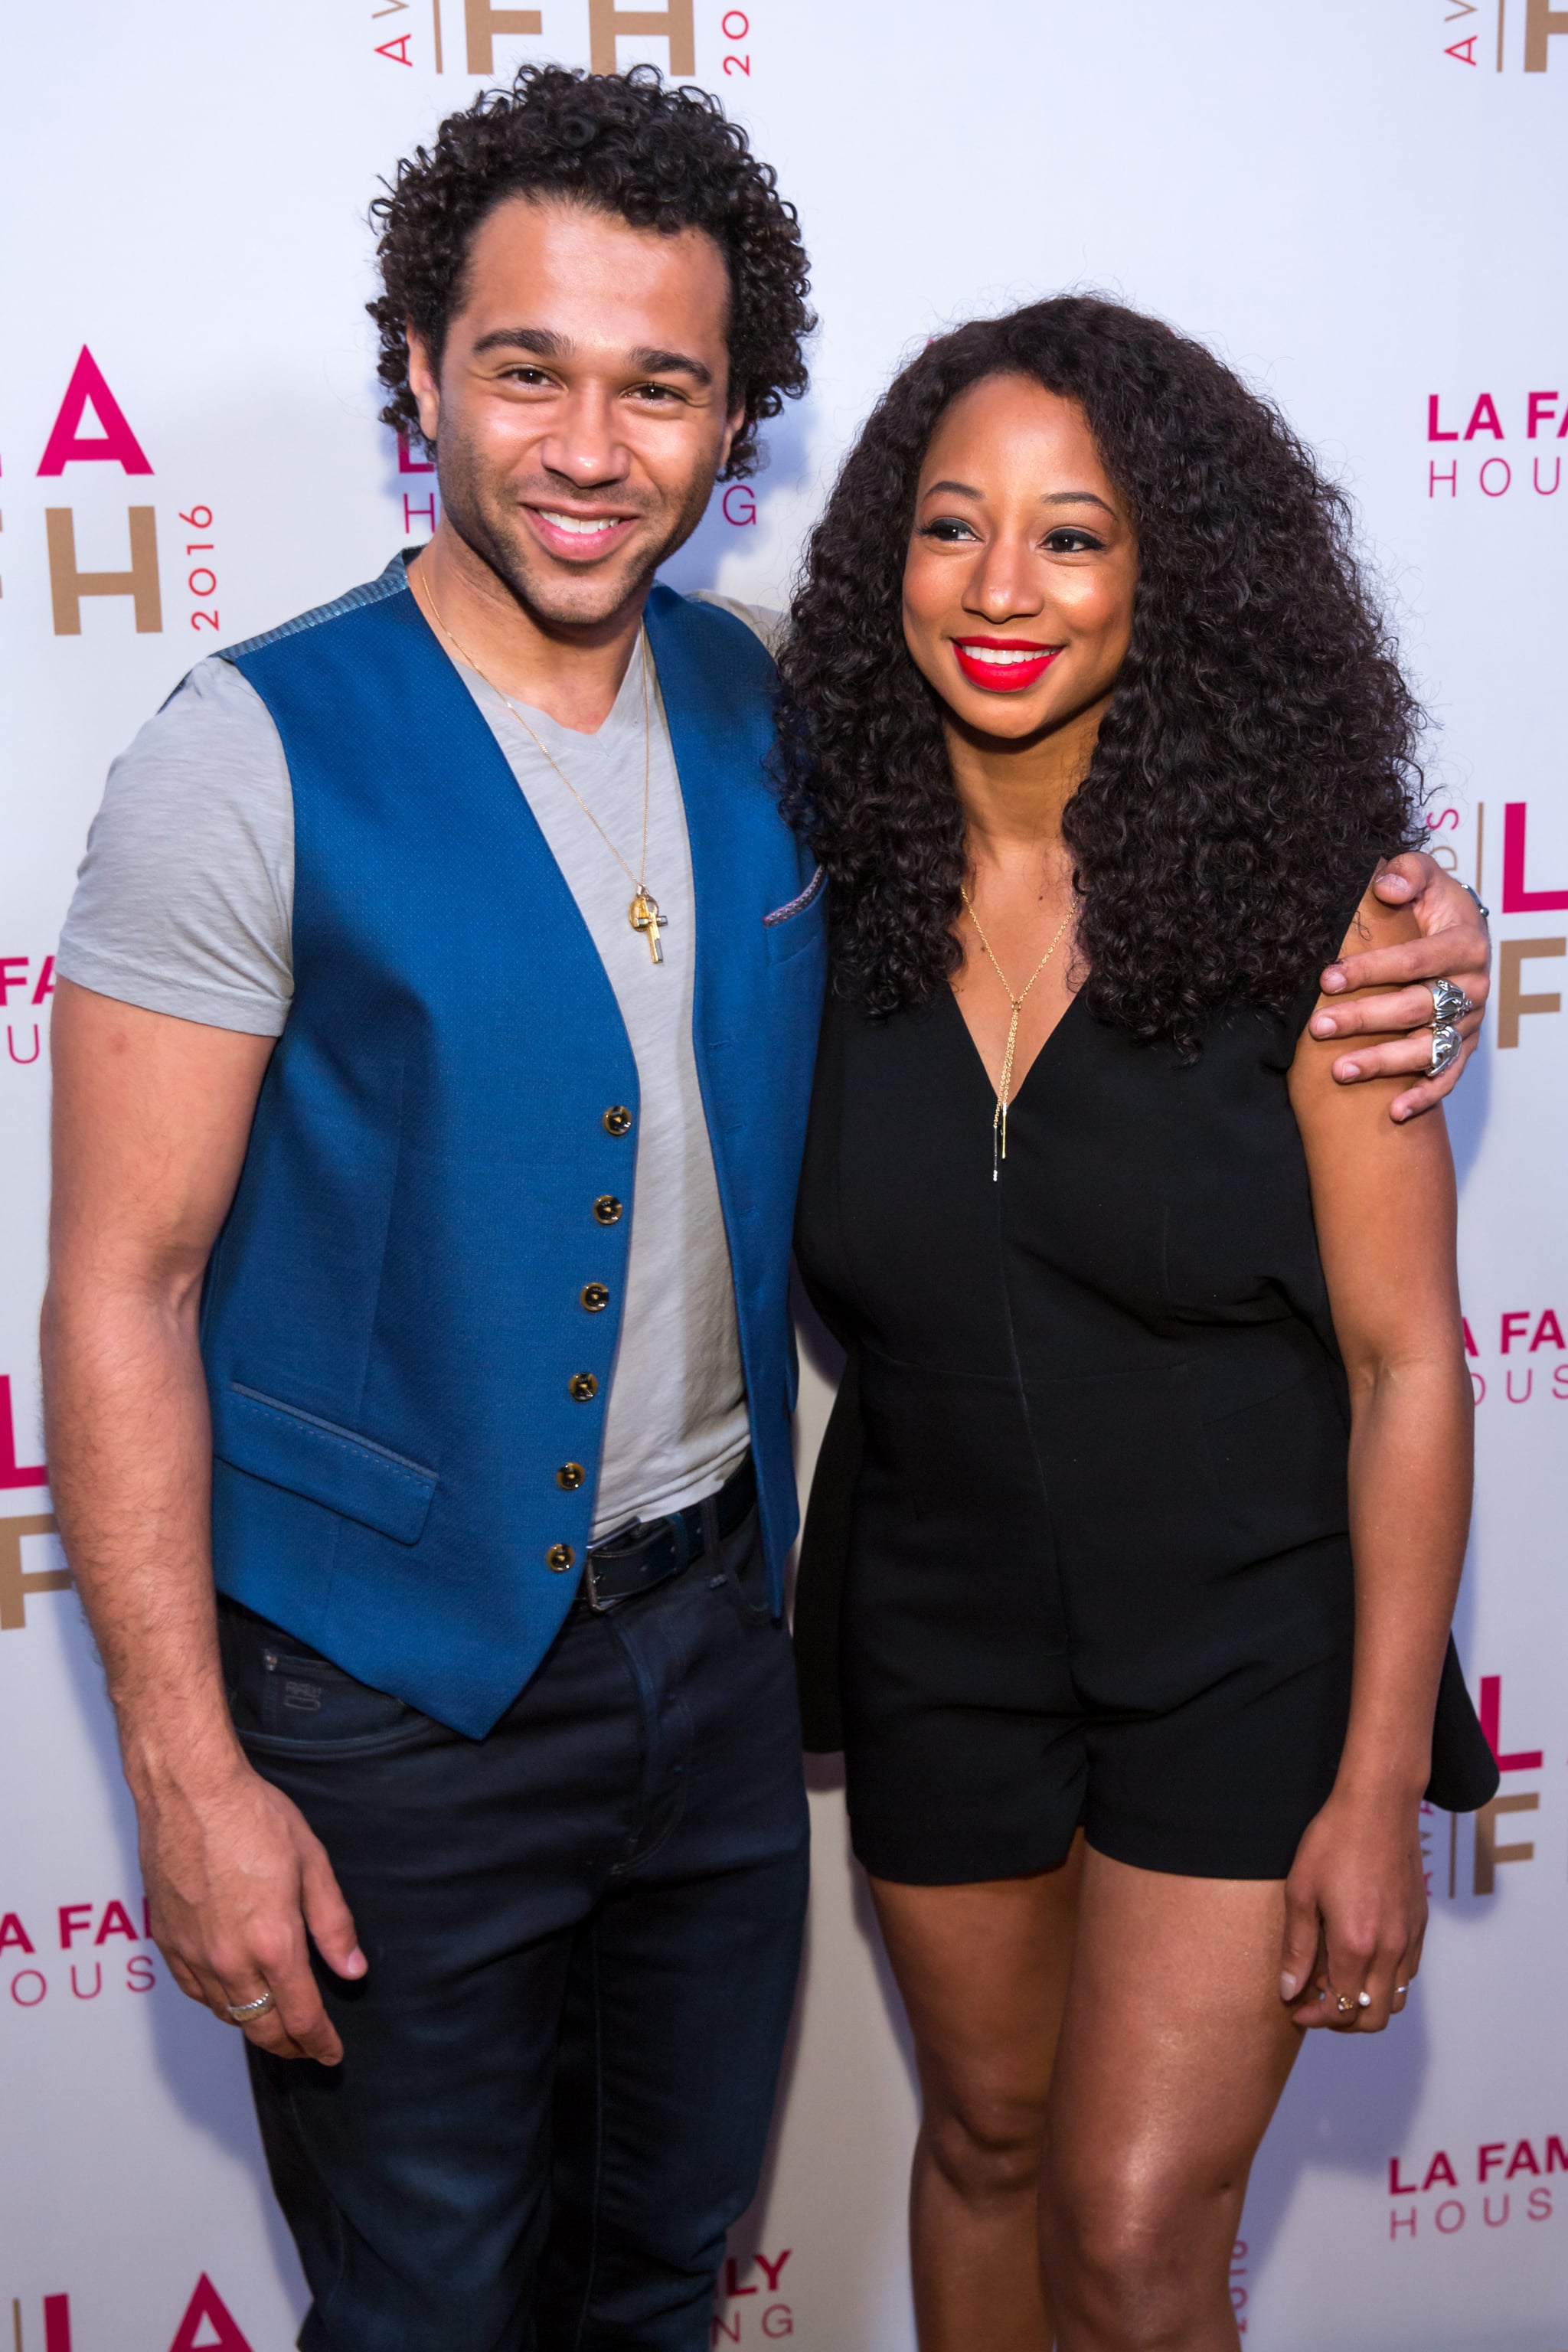 WEST HOLLYWOOD, CA - APRIL 21: Actor Corbin Bleu (L) and Monique Coleman attend the LA Family Housing's Annual Awards 2016 at The Lot on April 21, 2016 in West Hollywood, California.  (Photo by Greg Doherty/Getty Images)